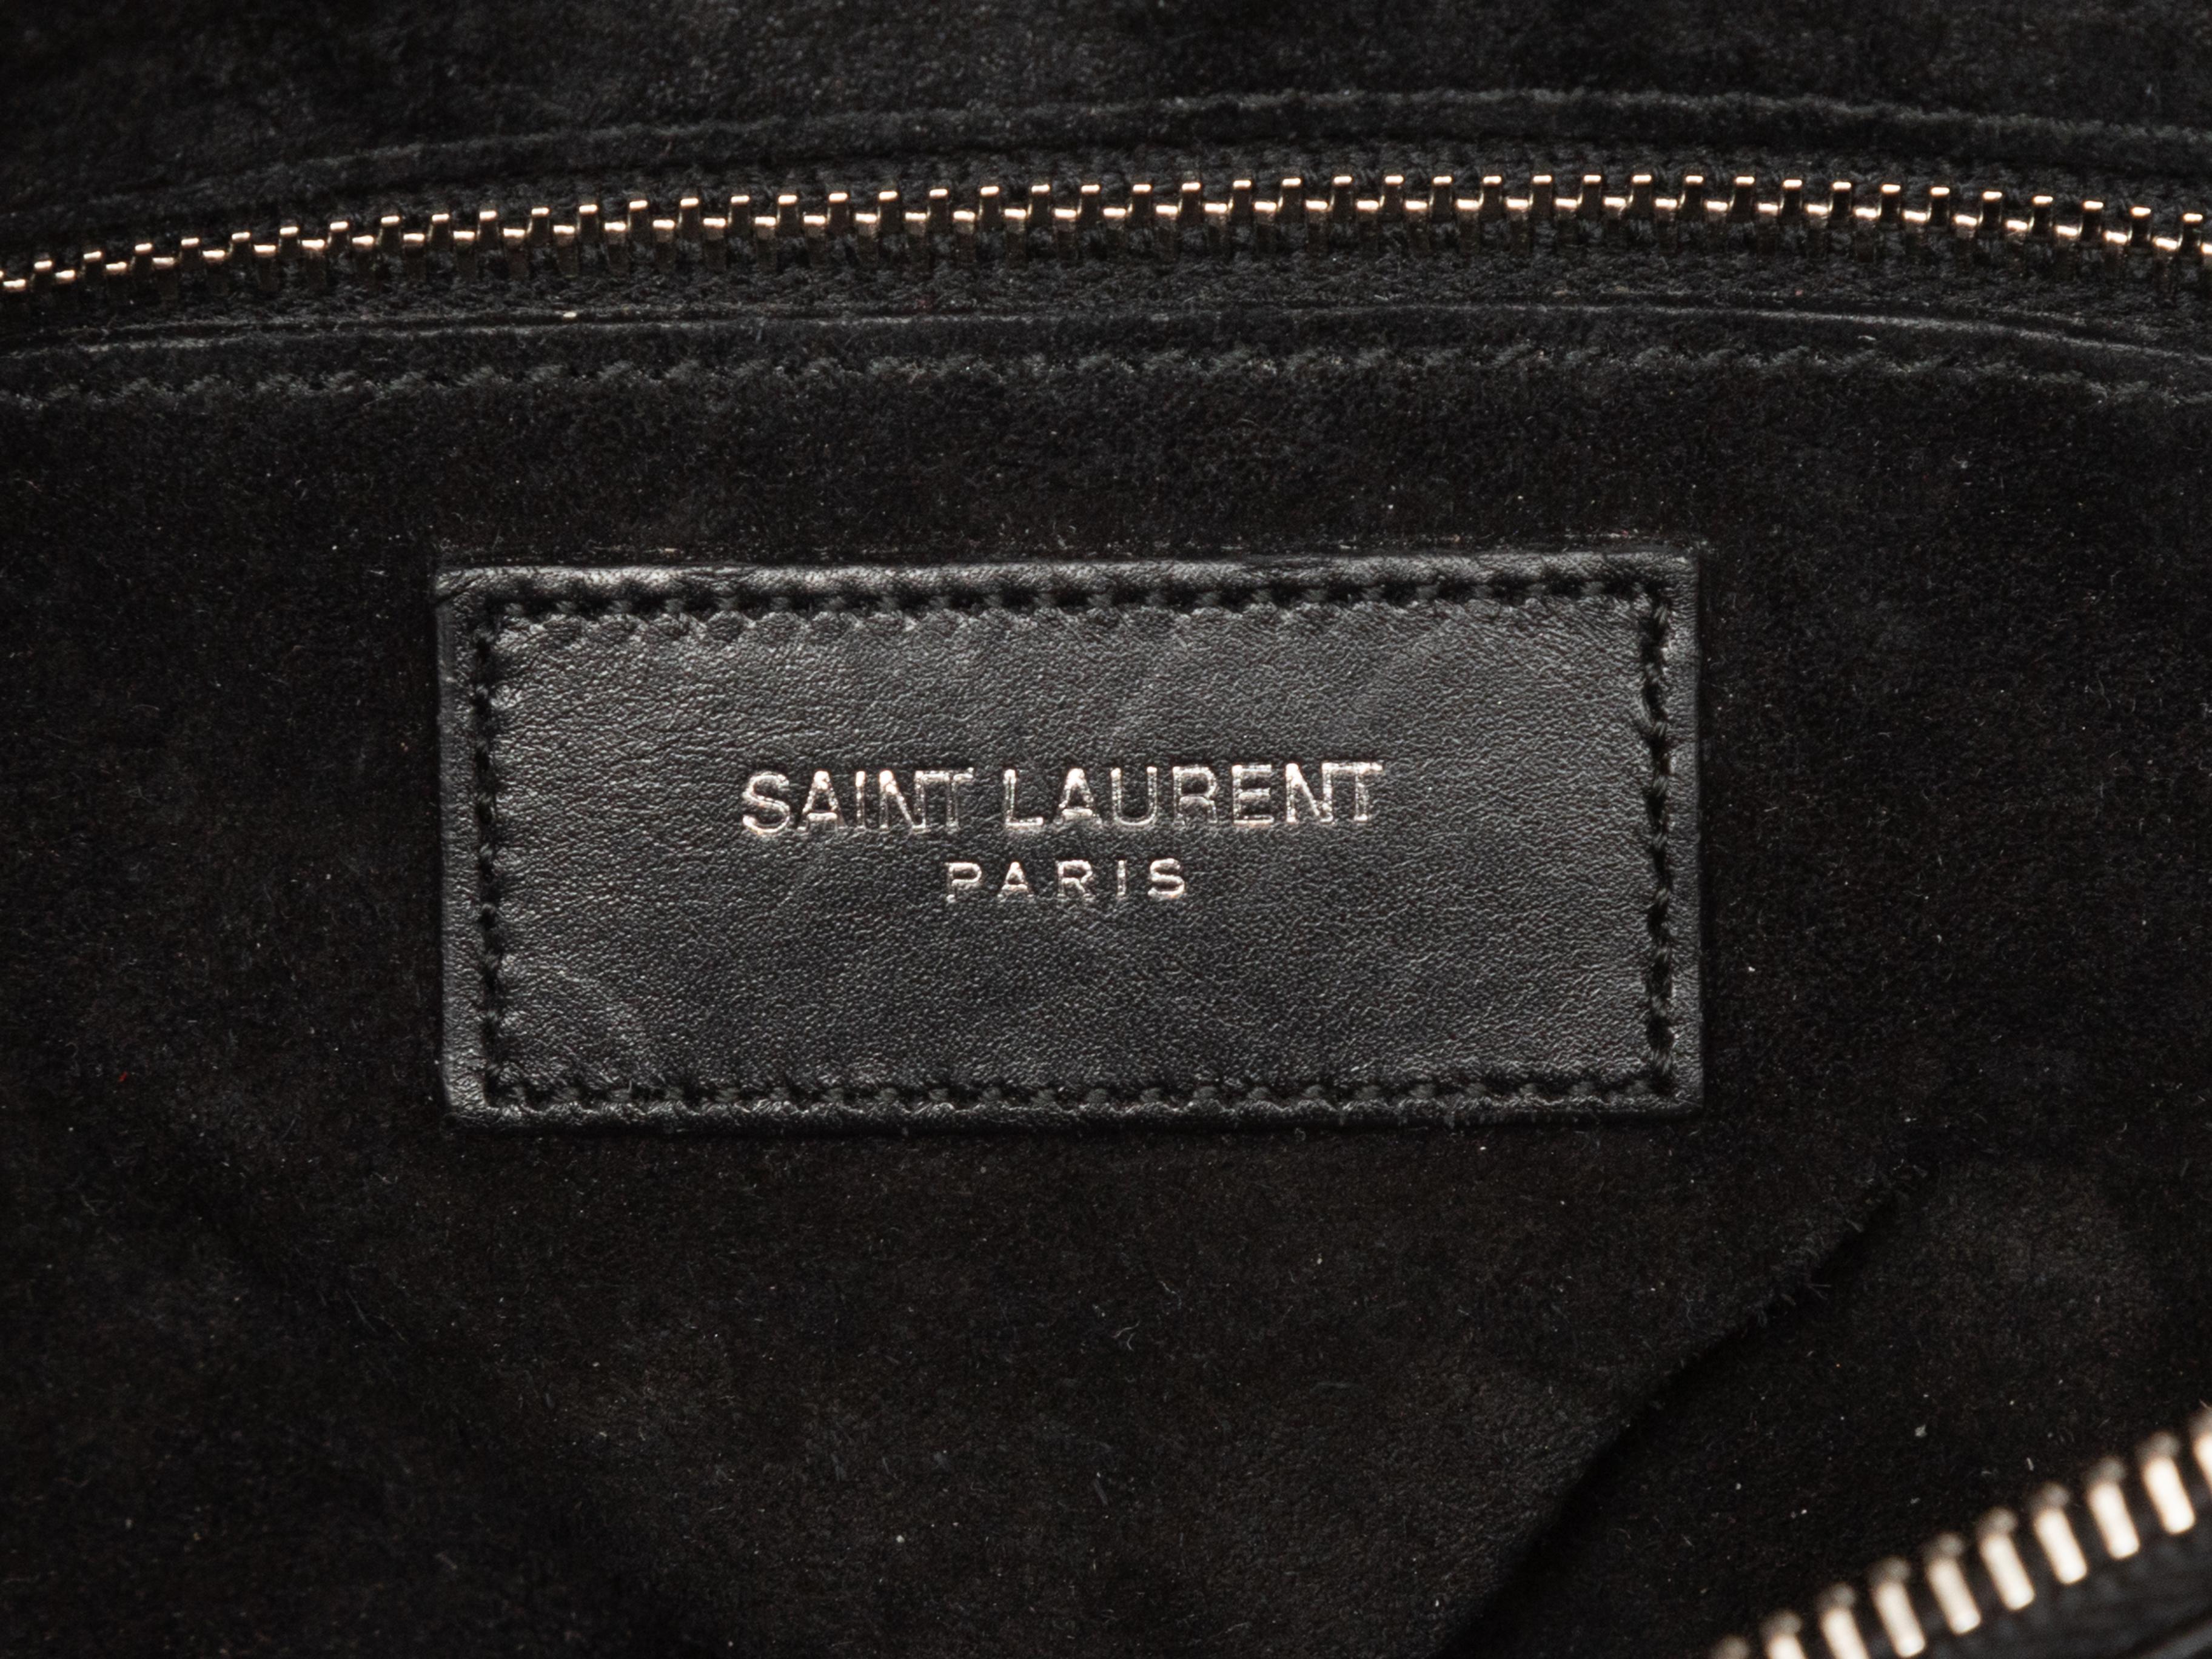 Black Saint Laurent Studded Leather Satchel. This satchel features a leather body, silver-tone hardware, dual rolled top handles, and a top zip closure. 12.5